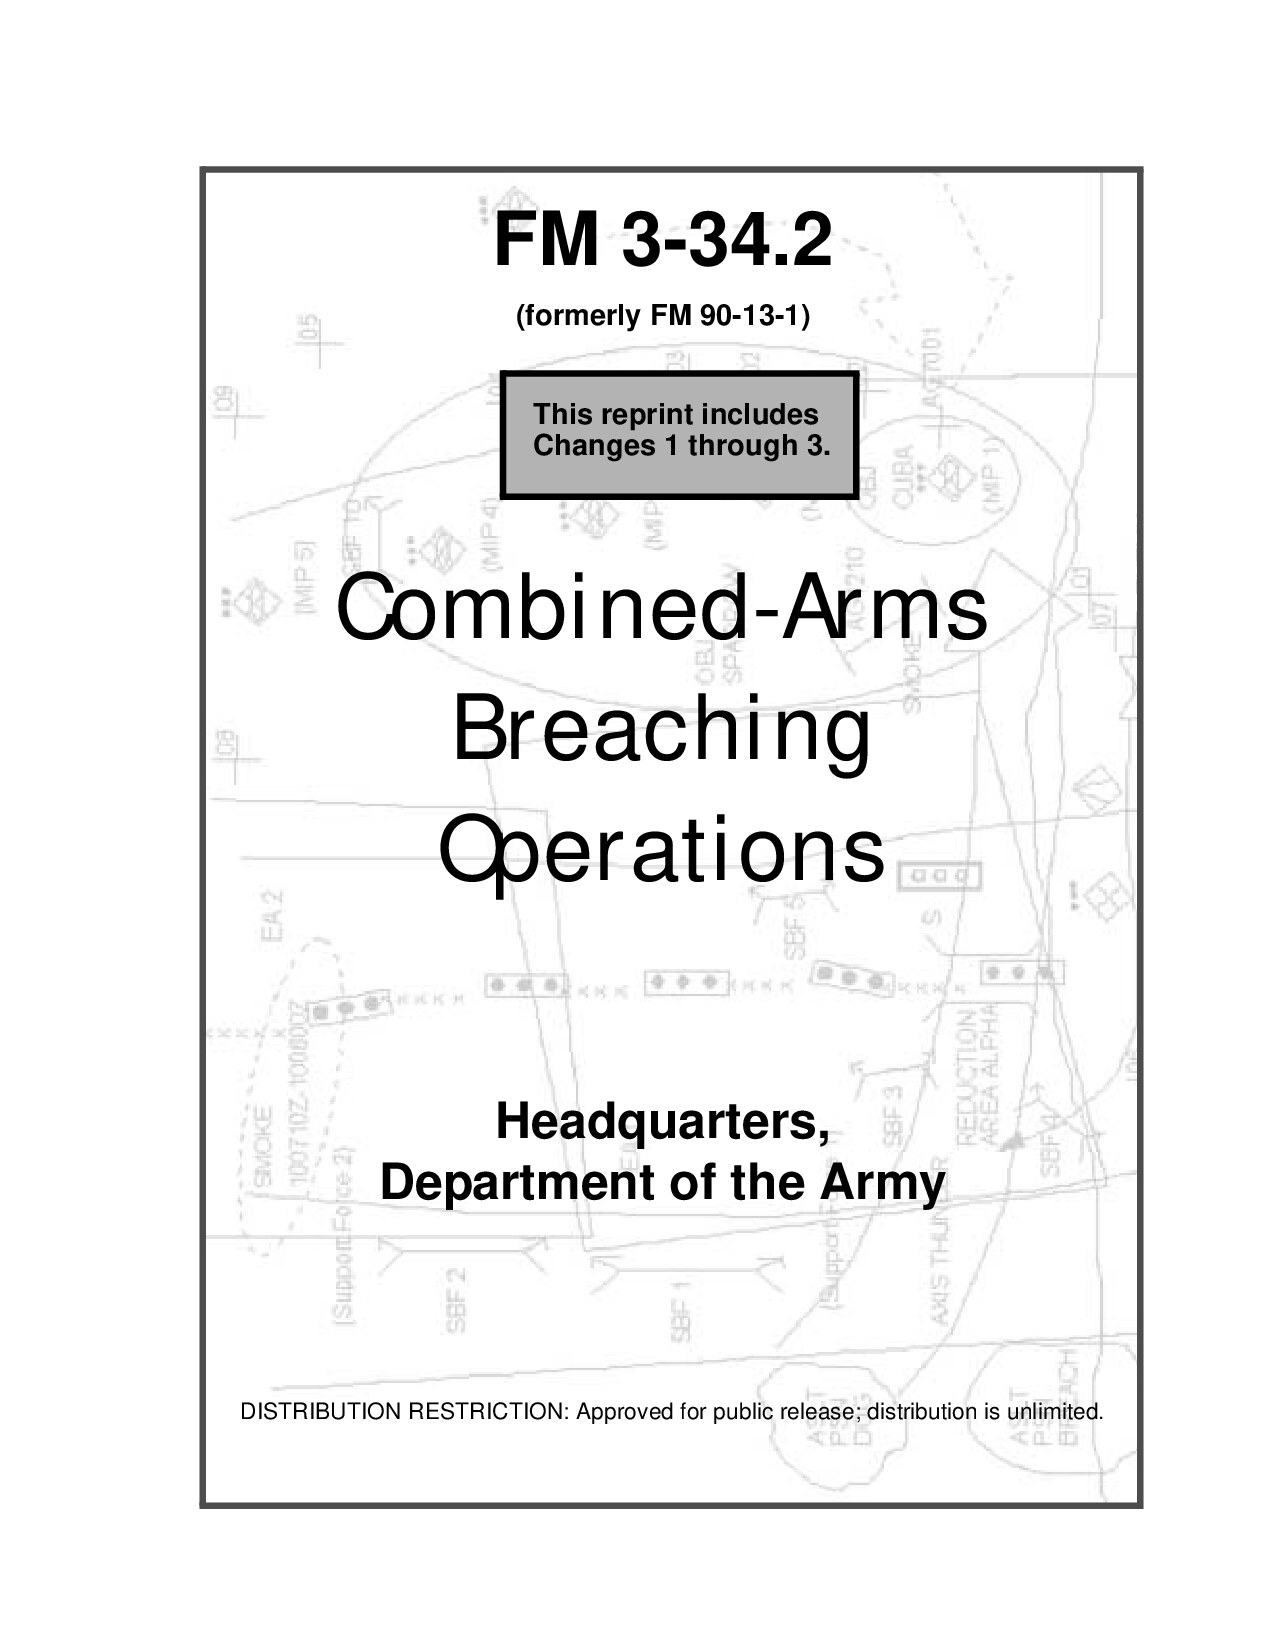 FM 3-34.2 Combined Arms Breaching Operations